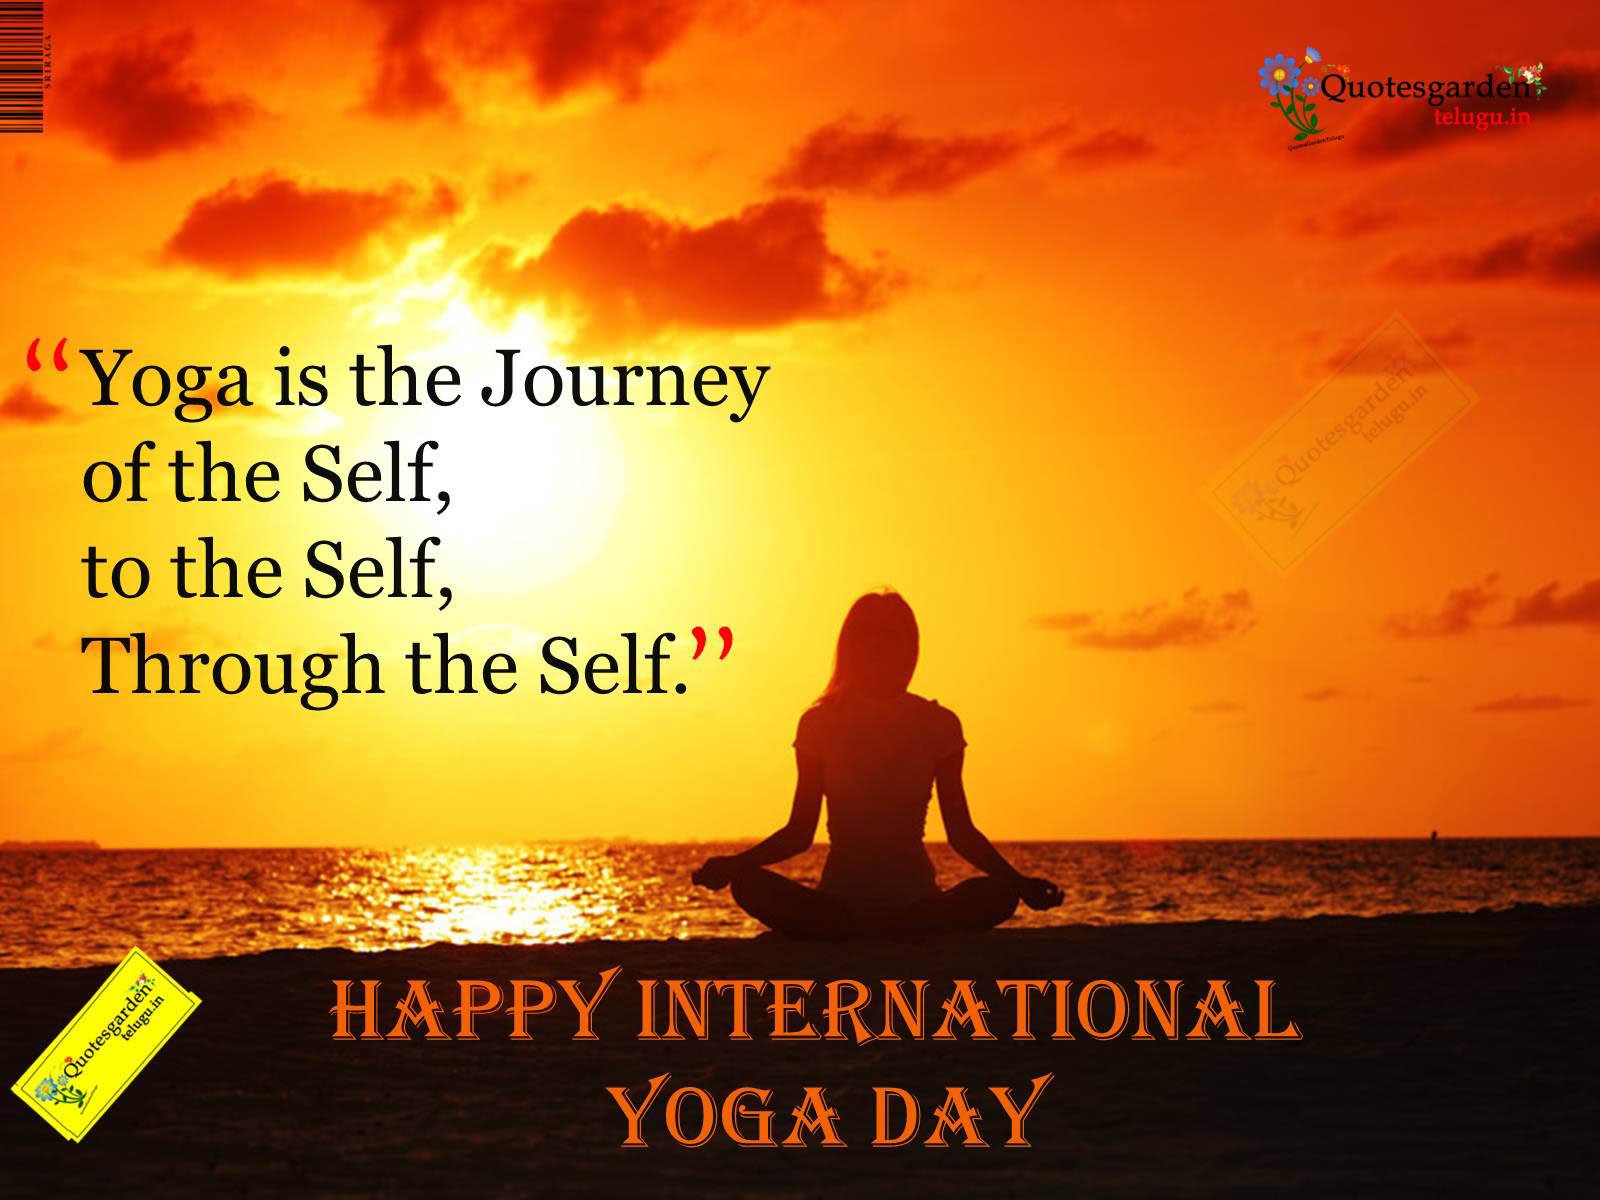 International Yoga Day Wish Pictures And Image